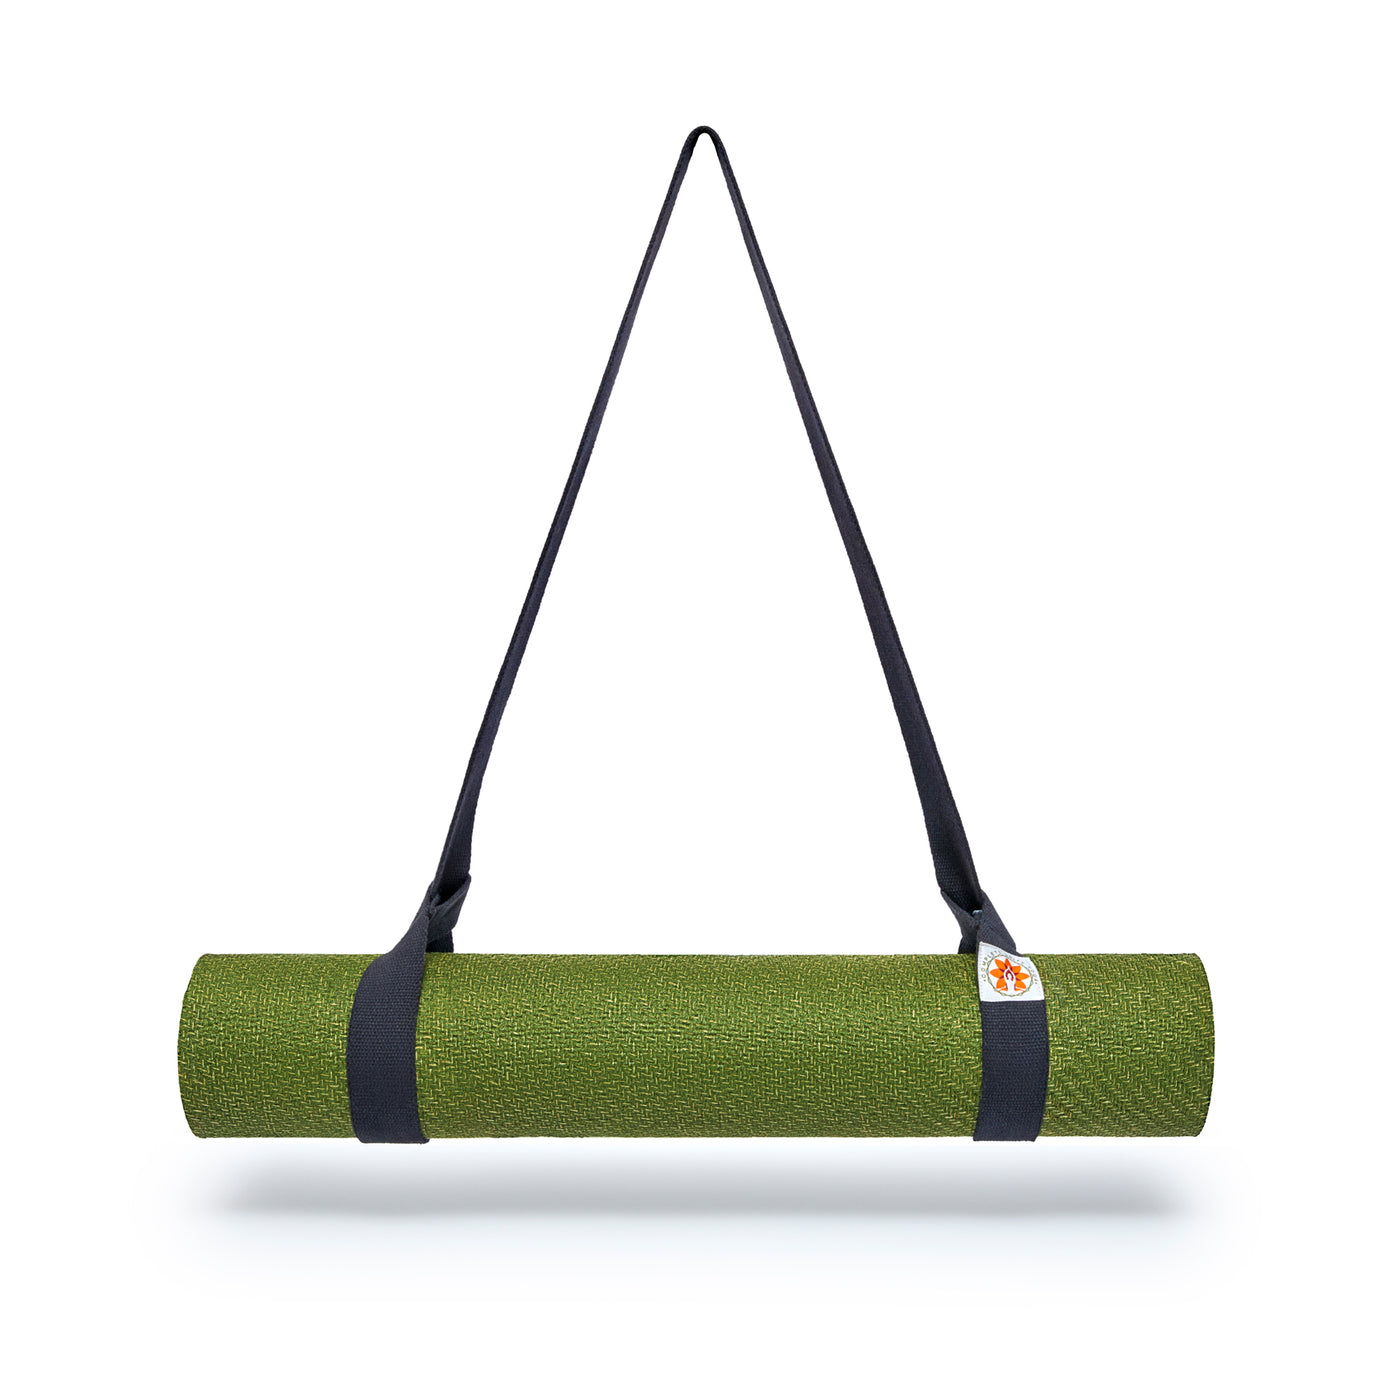 Yoga Mat Carrying Strap with CompleteGrip Eco Jute Yoga Mat - Complete Unity Yoga - 